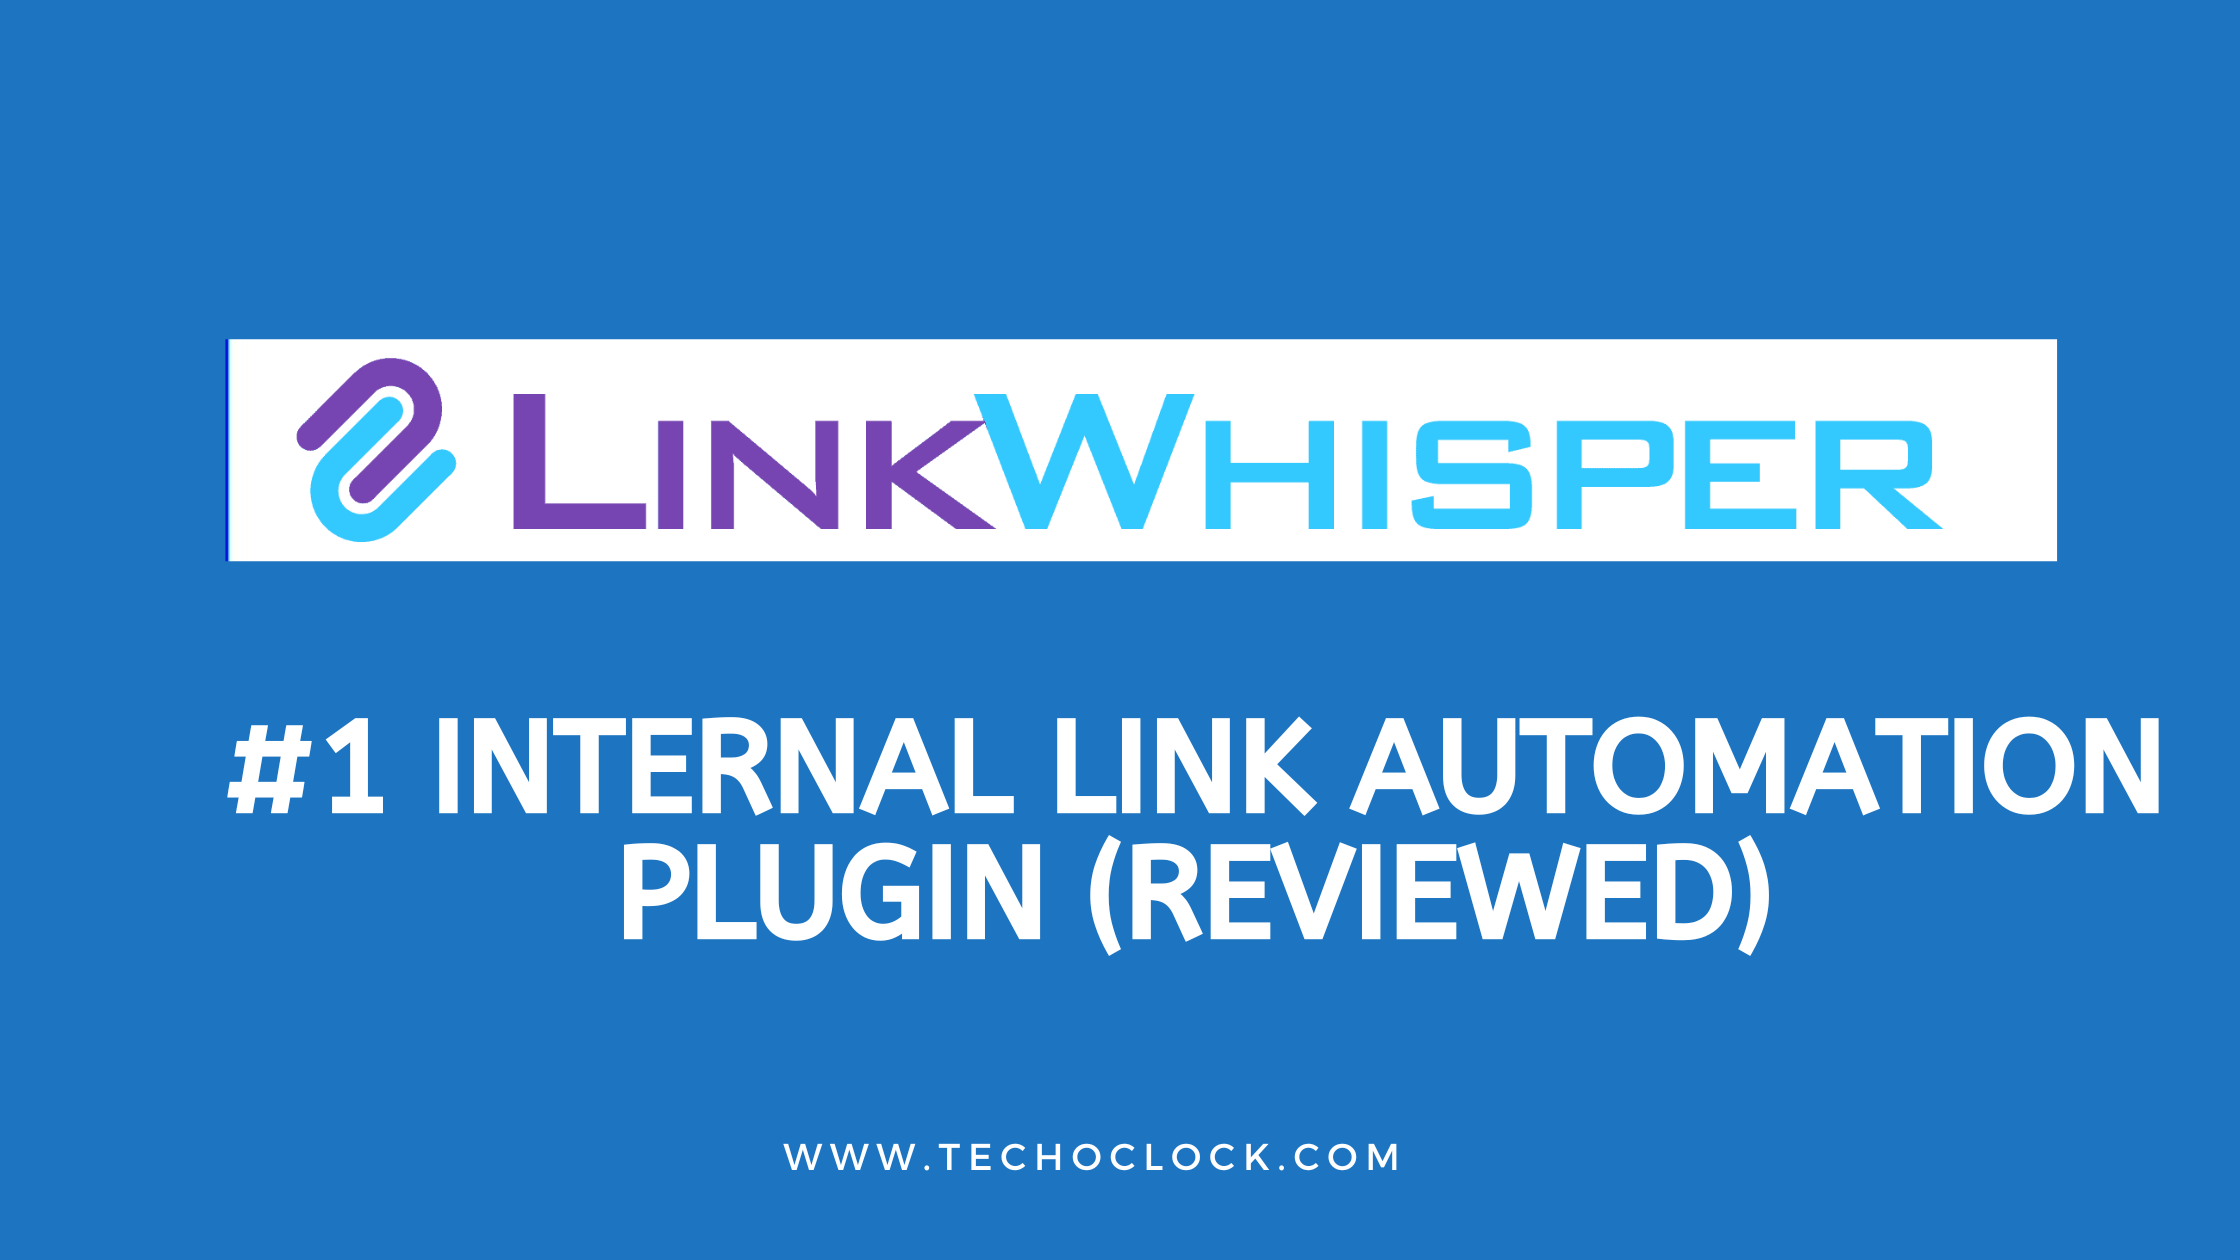 Link Whisper Review & Tutorial: Features, Pricing, Pros and Cons?